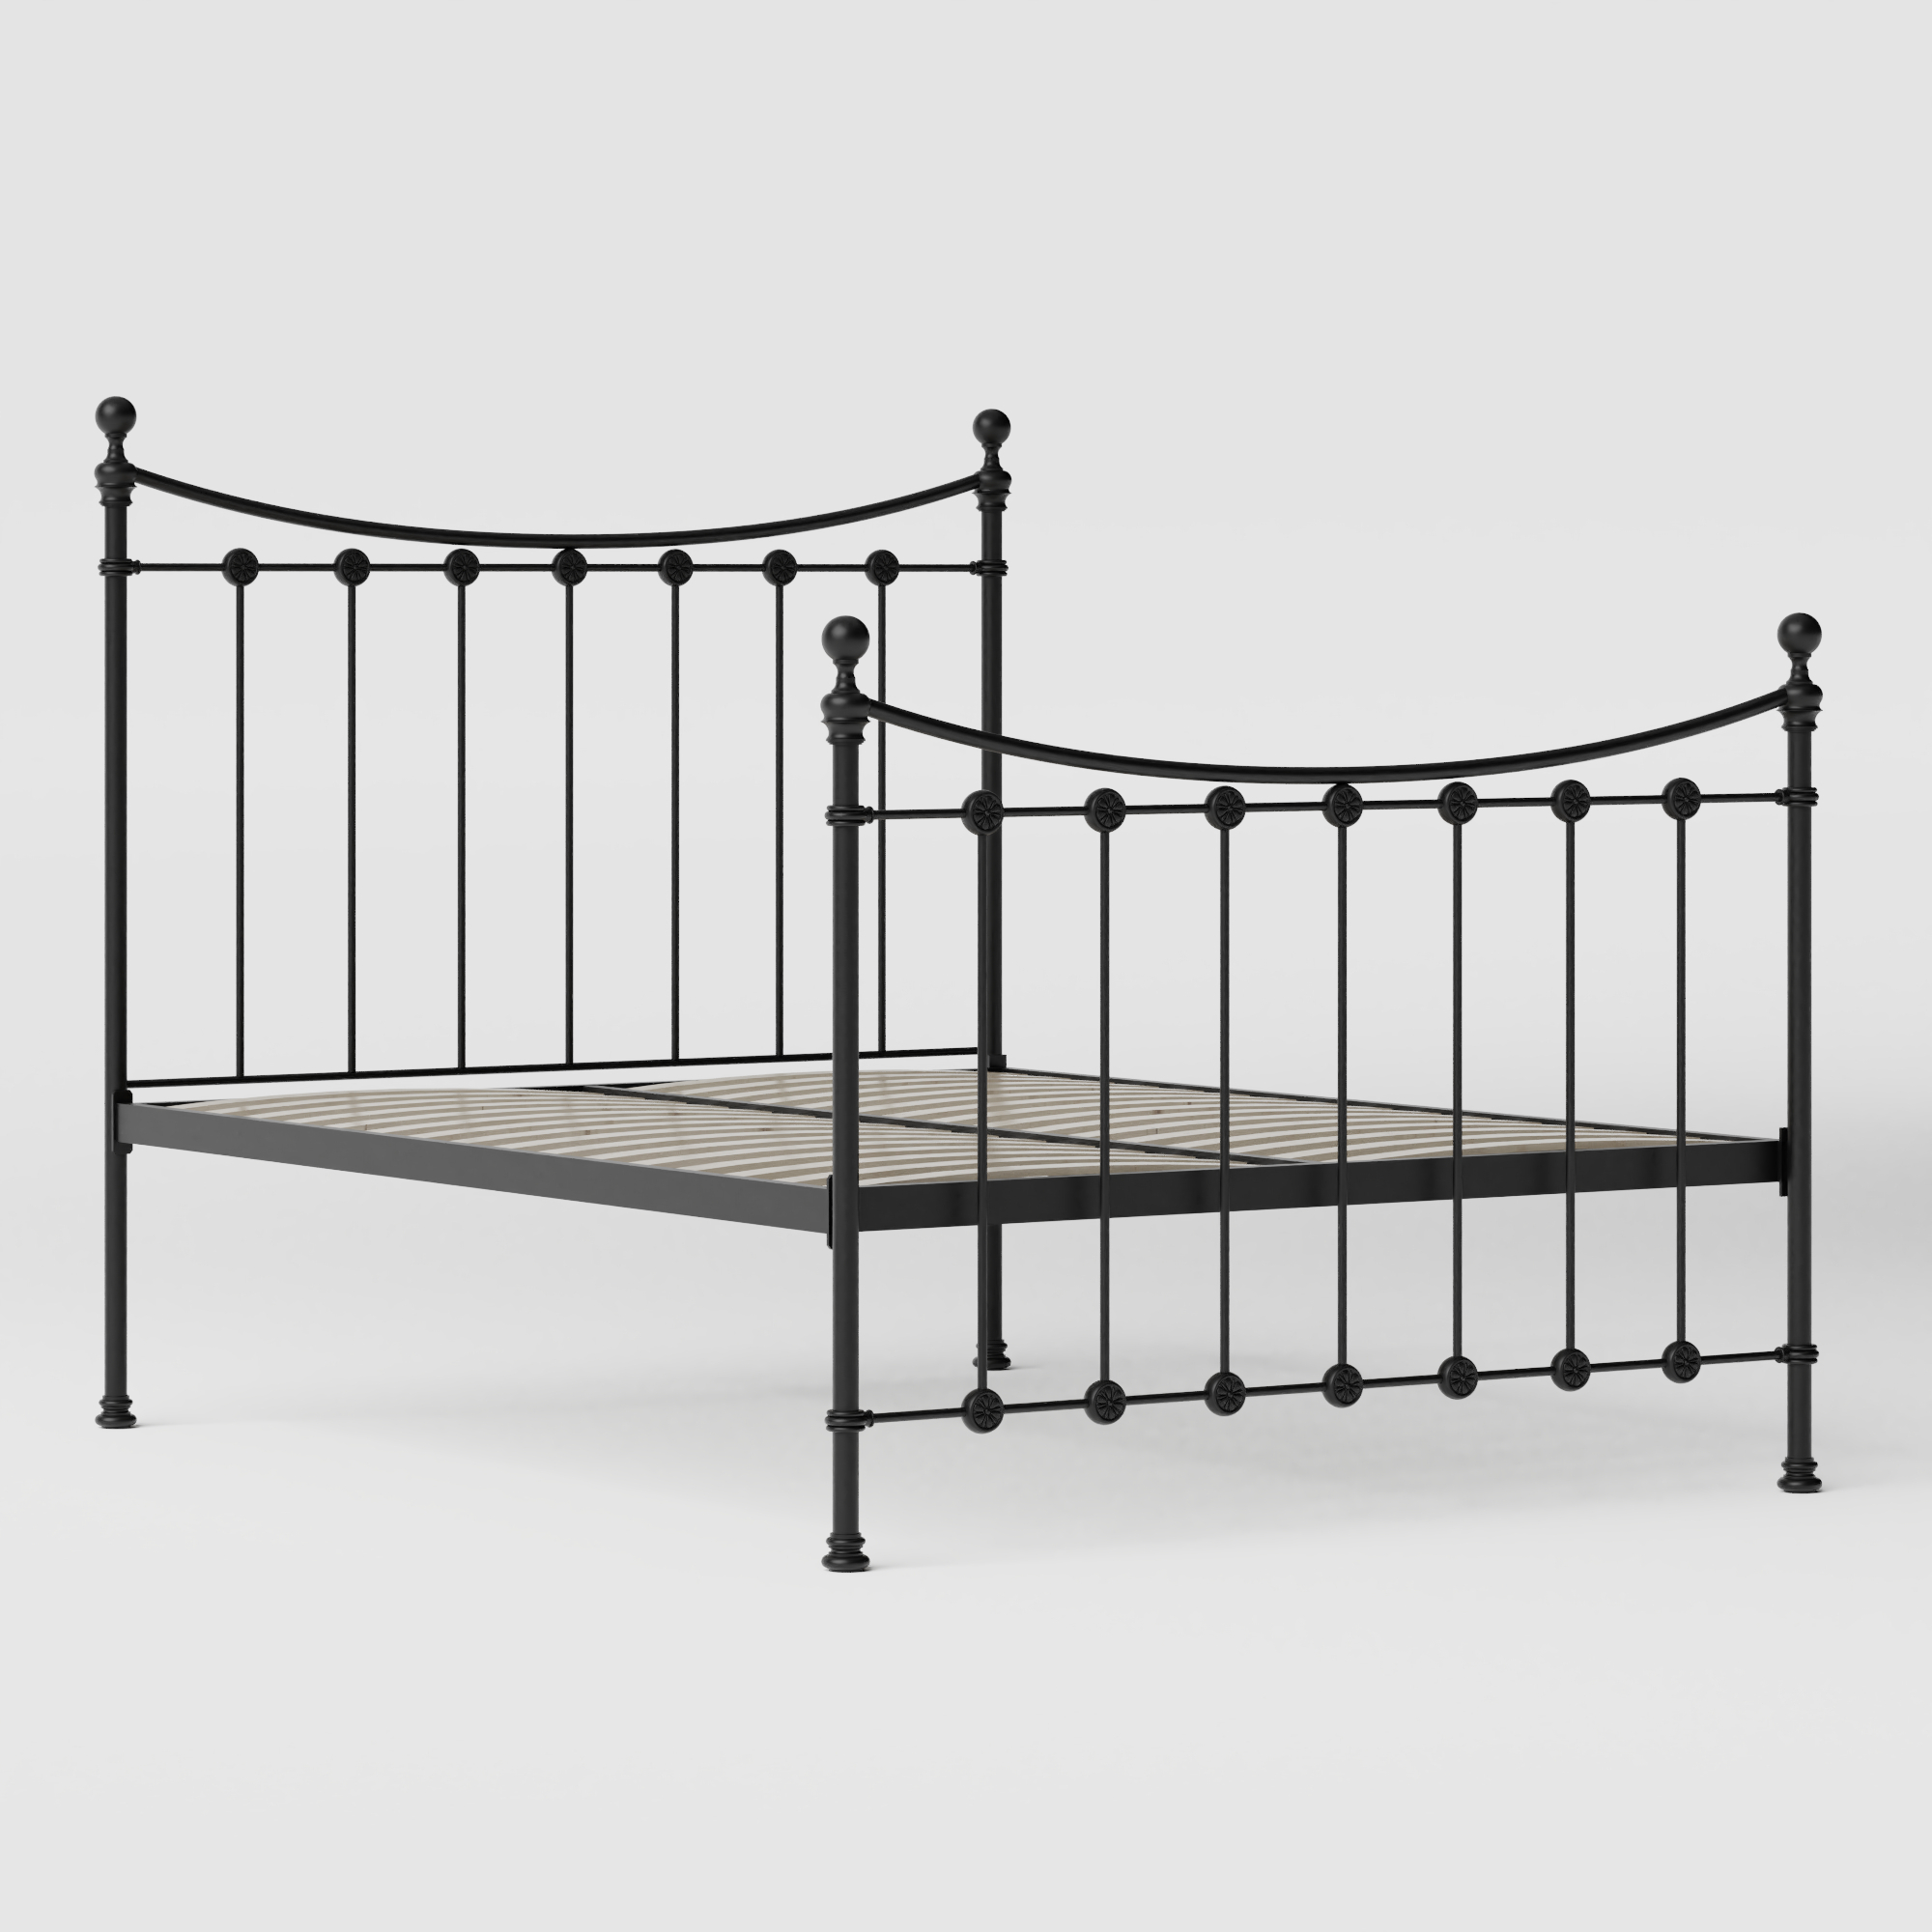 Carrick Solo iron/metal bed in black